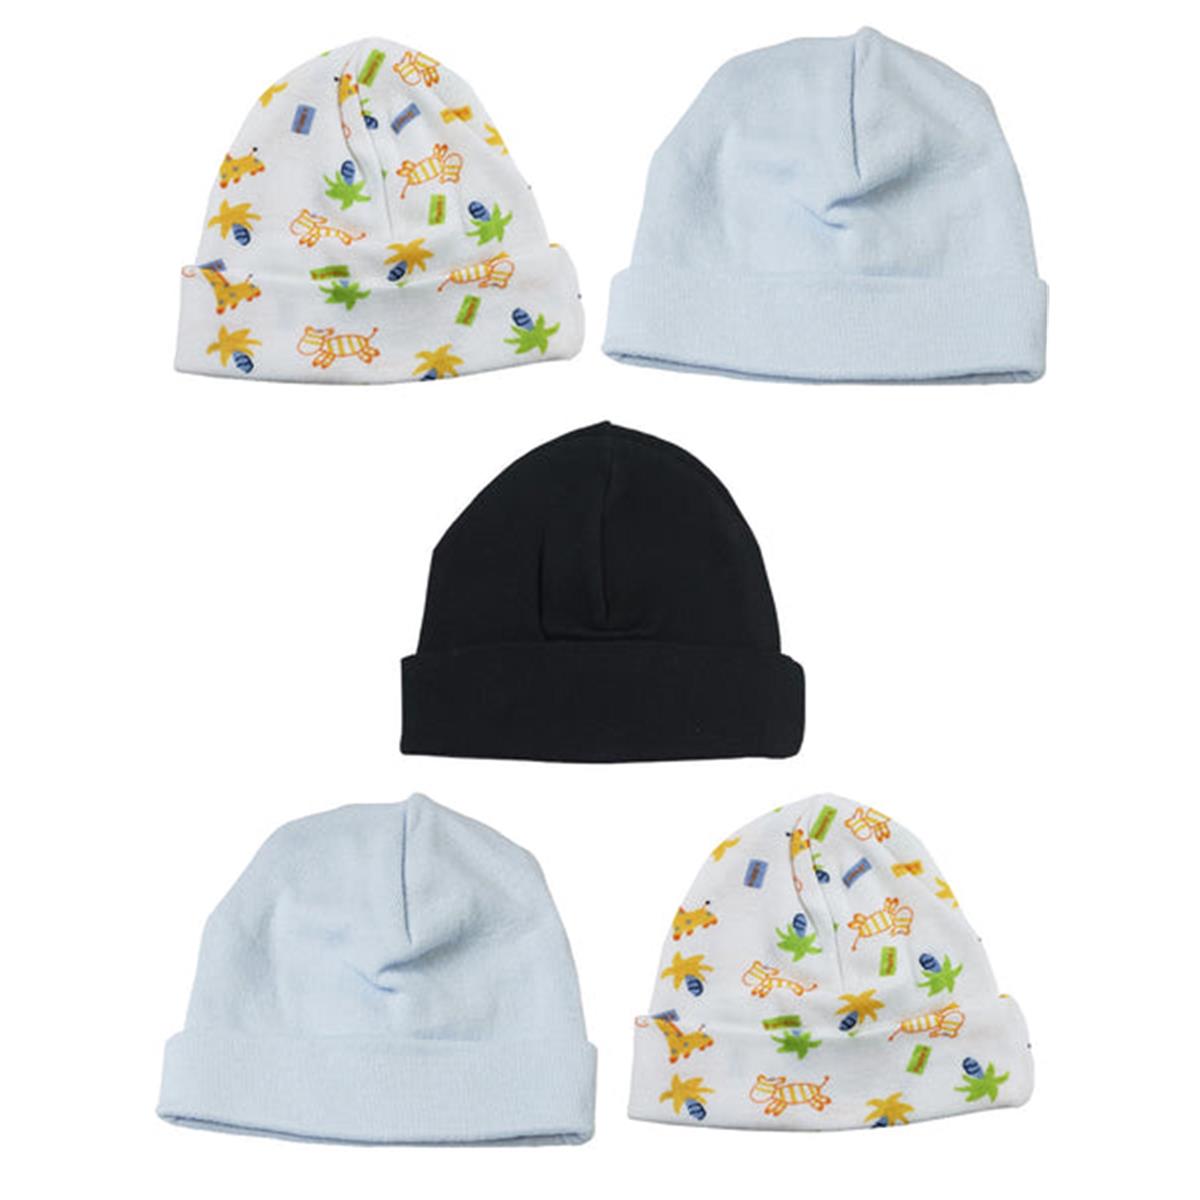 Picture of Bambini LS-0506 Boys Baby Caps - Blue&#44; Black & Print - One Size - 5 per Pack